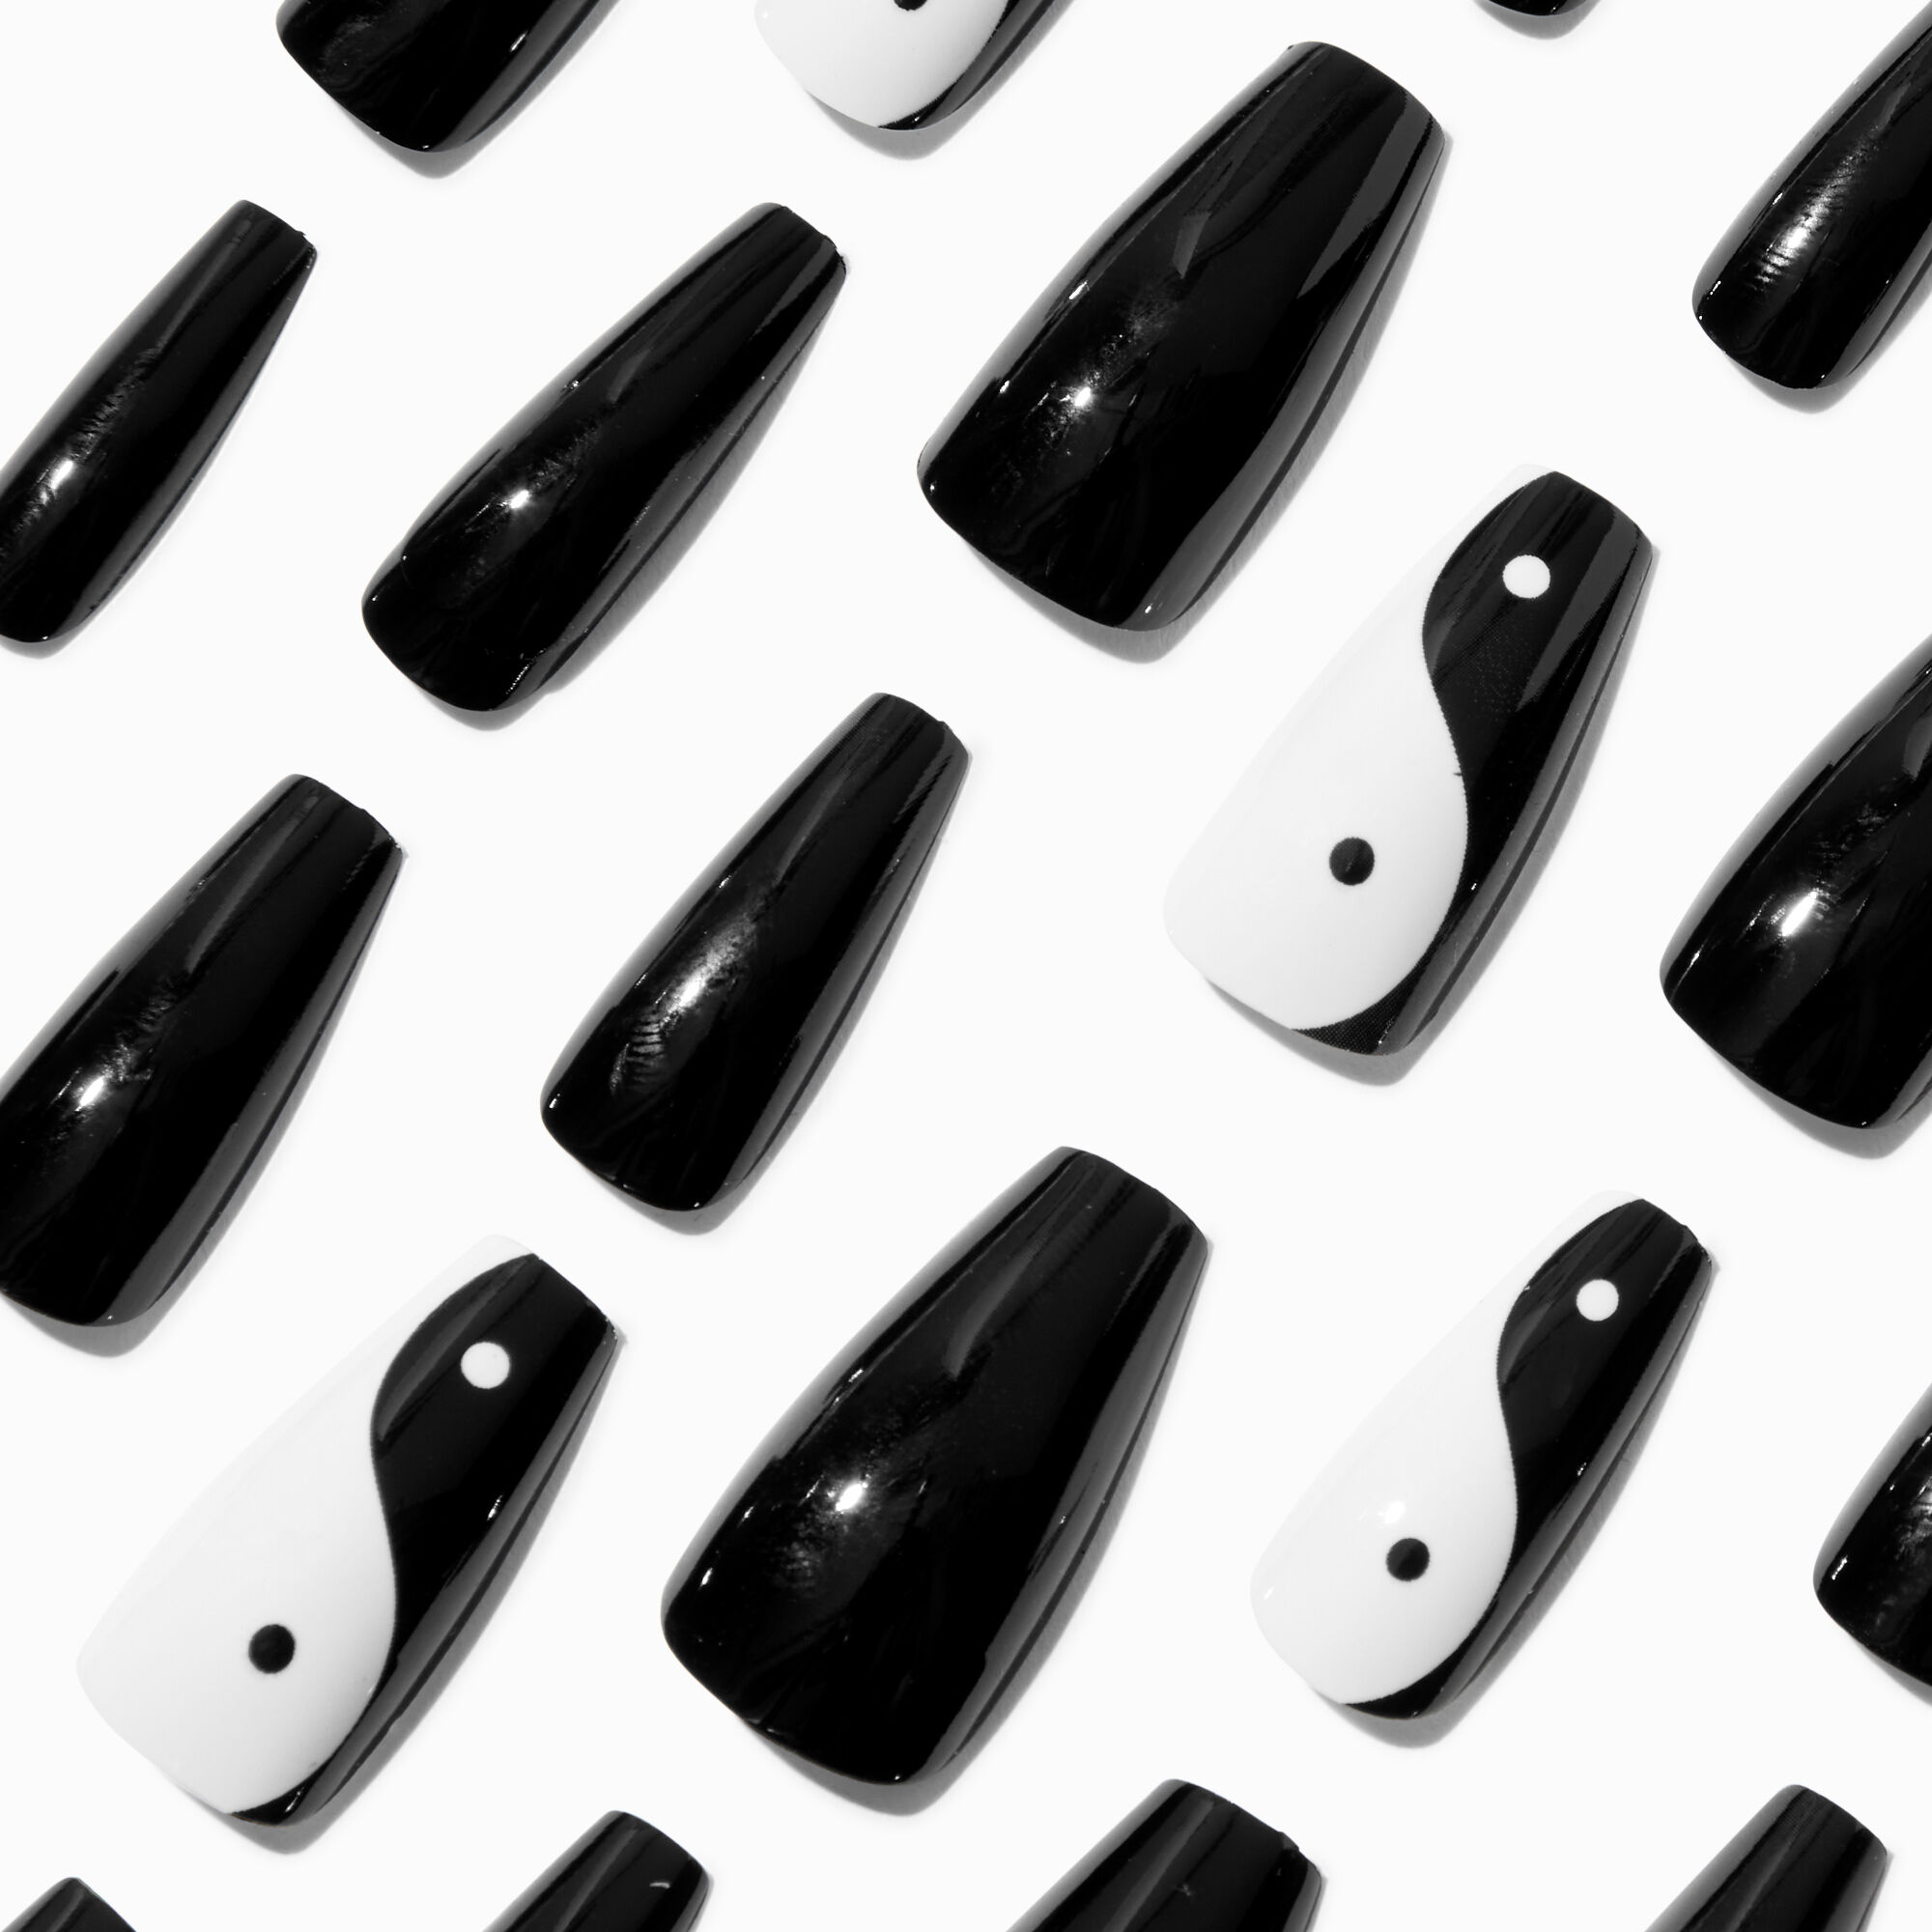 View Claires Black Yin Yang Squareletto Faux Nail Set 24 Pack White information